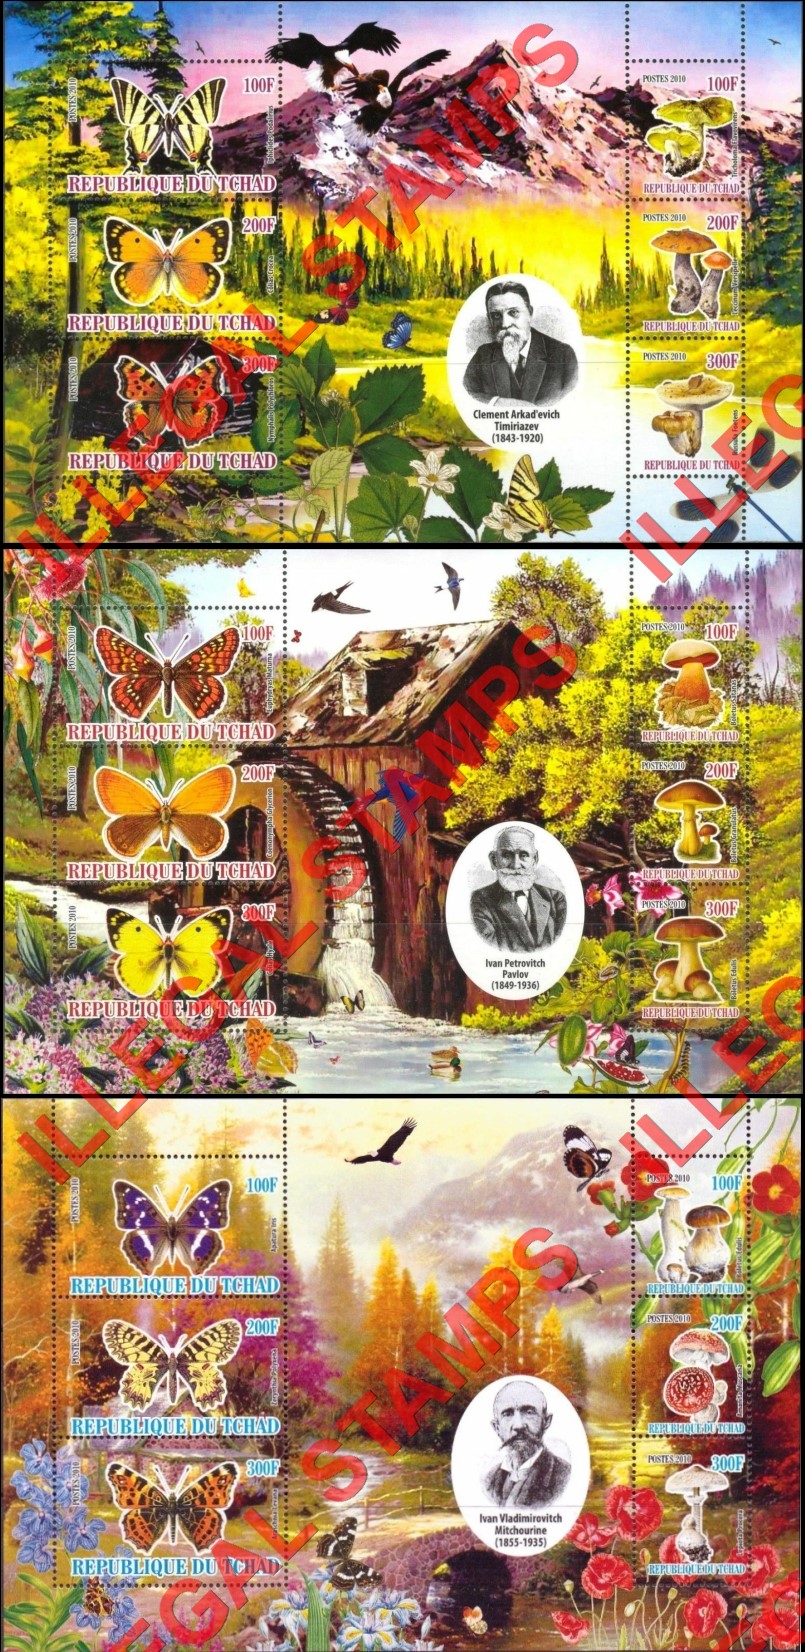 Chad 2010 Butterflies and Mushrooms Illegal Stamps in Souvenir Sheets of 6 (Part 2)